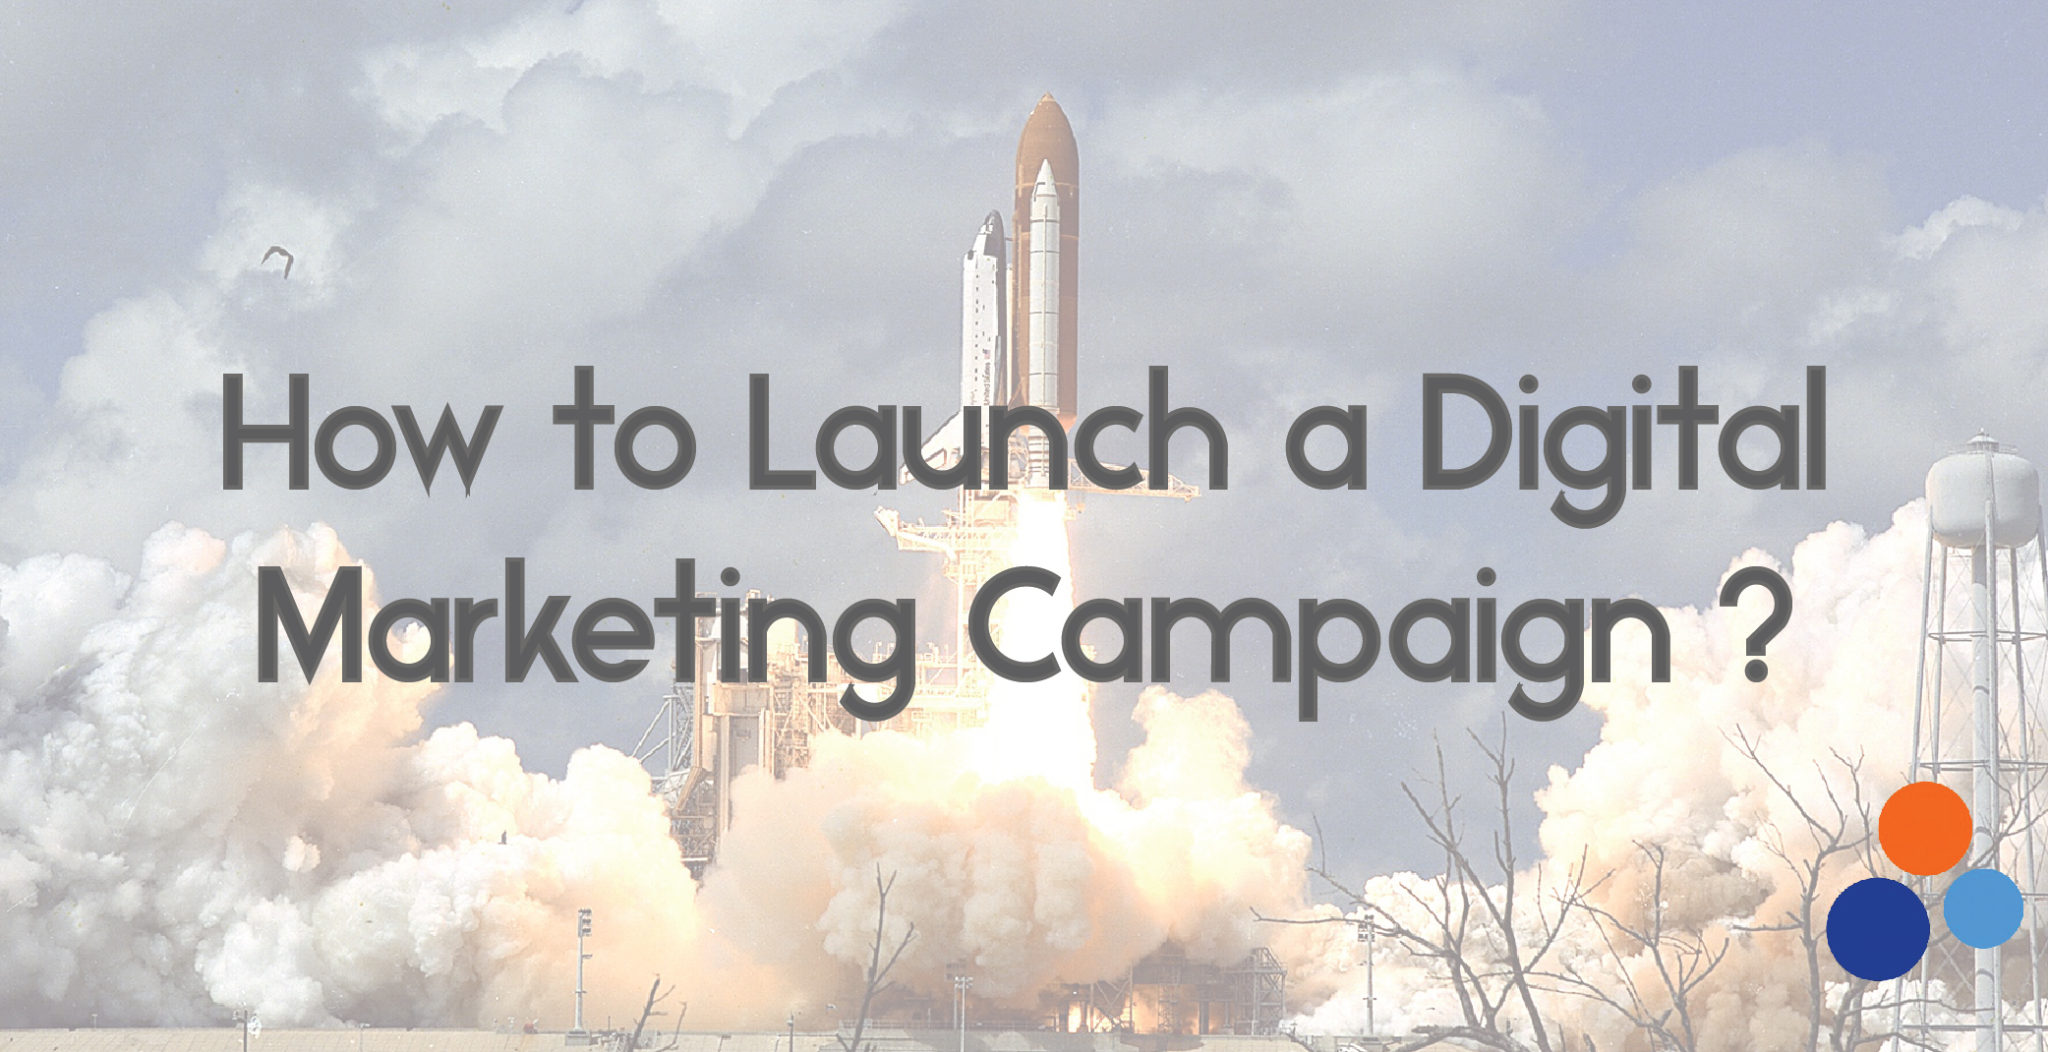 Launching a digital marketing campaign to